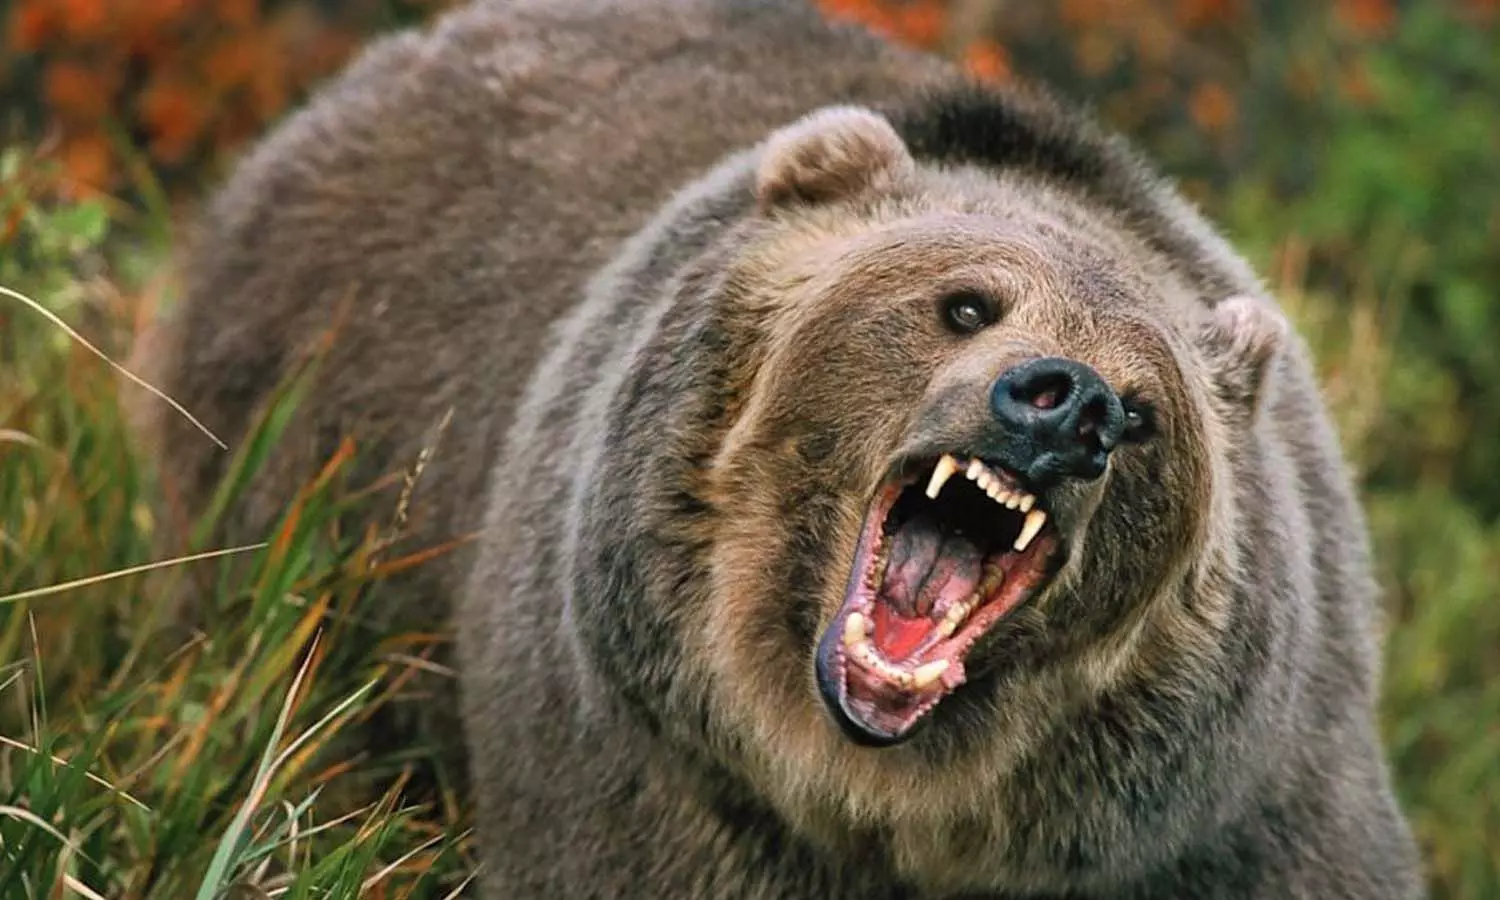 In Chitrakoot, the bears attacked the woodcutter in the forest, broke the jaw